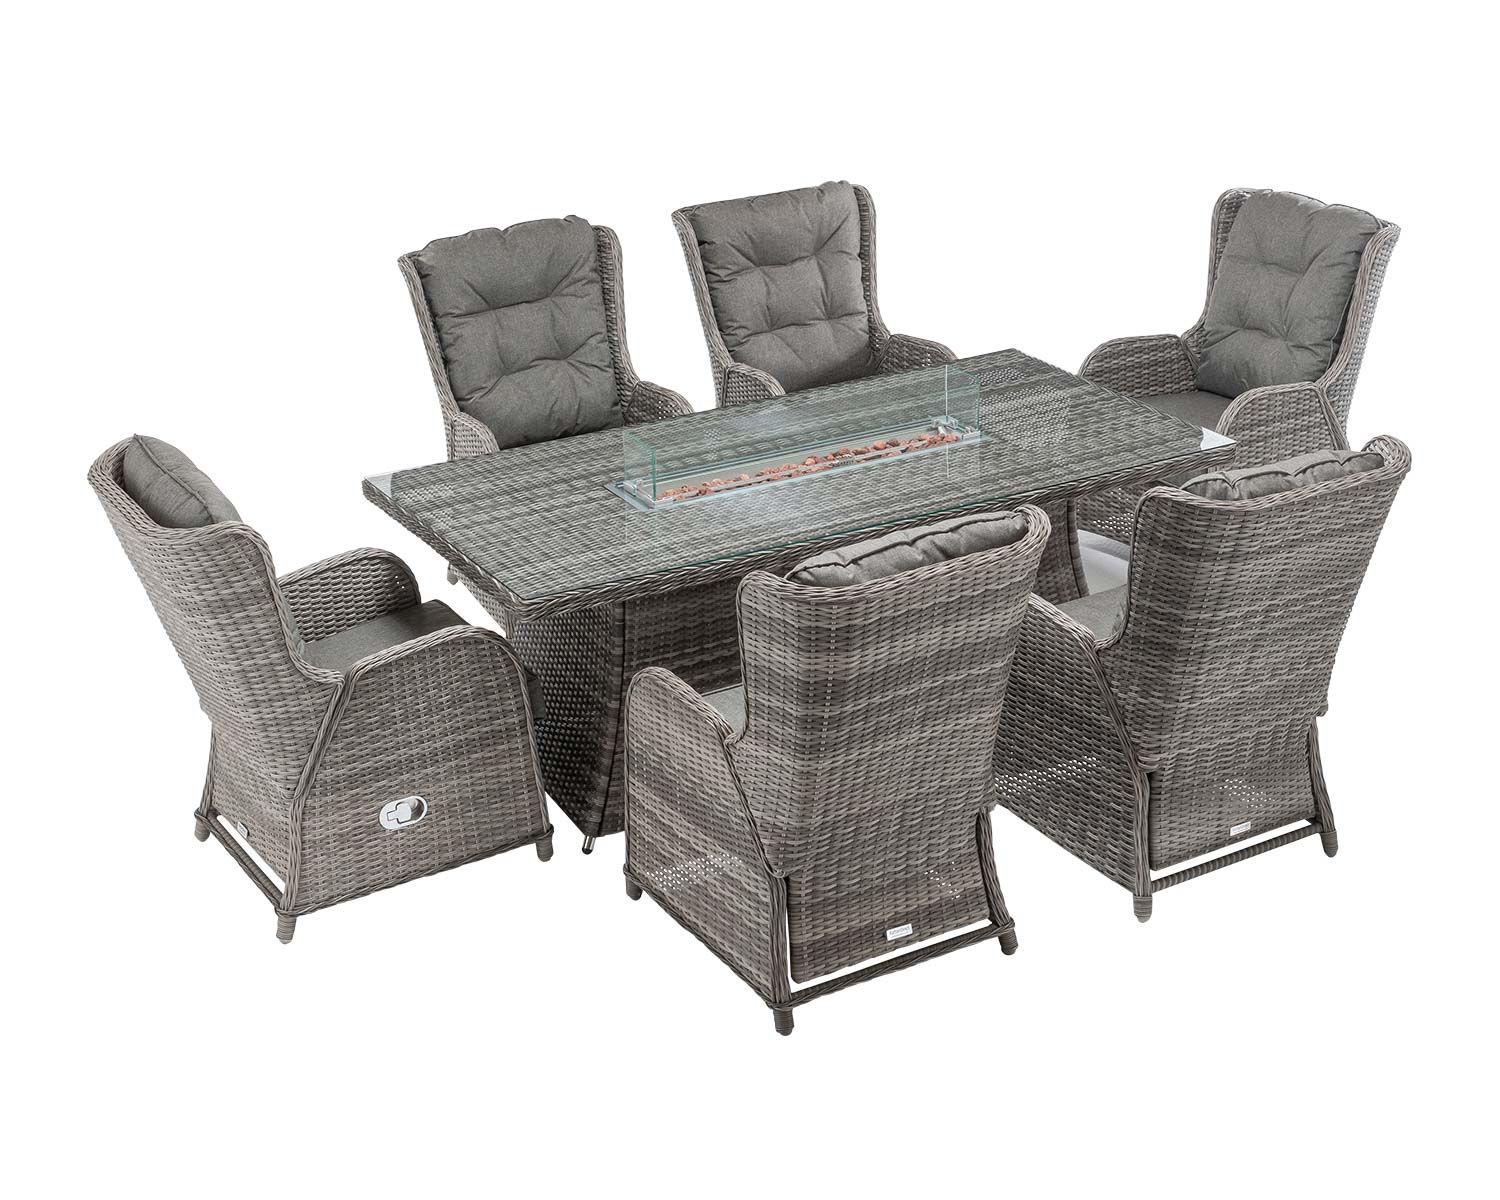 6 Reclining Rattan Garden Chairs Amp Large Rectangular Fire Pit Dining Table In Grey Fiji Rattan Direct